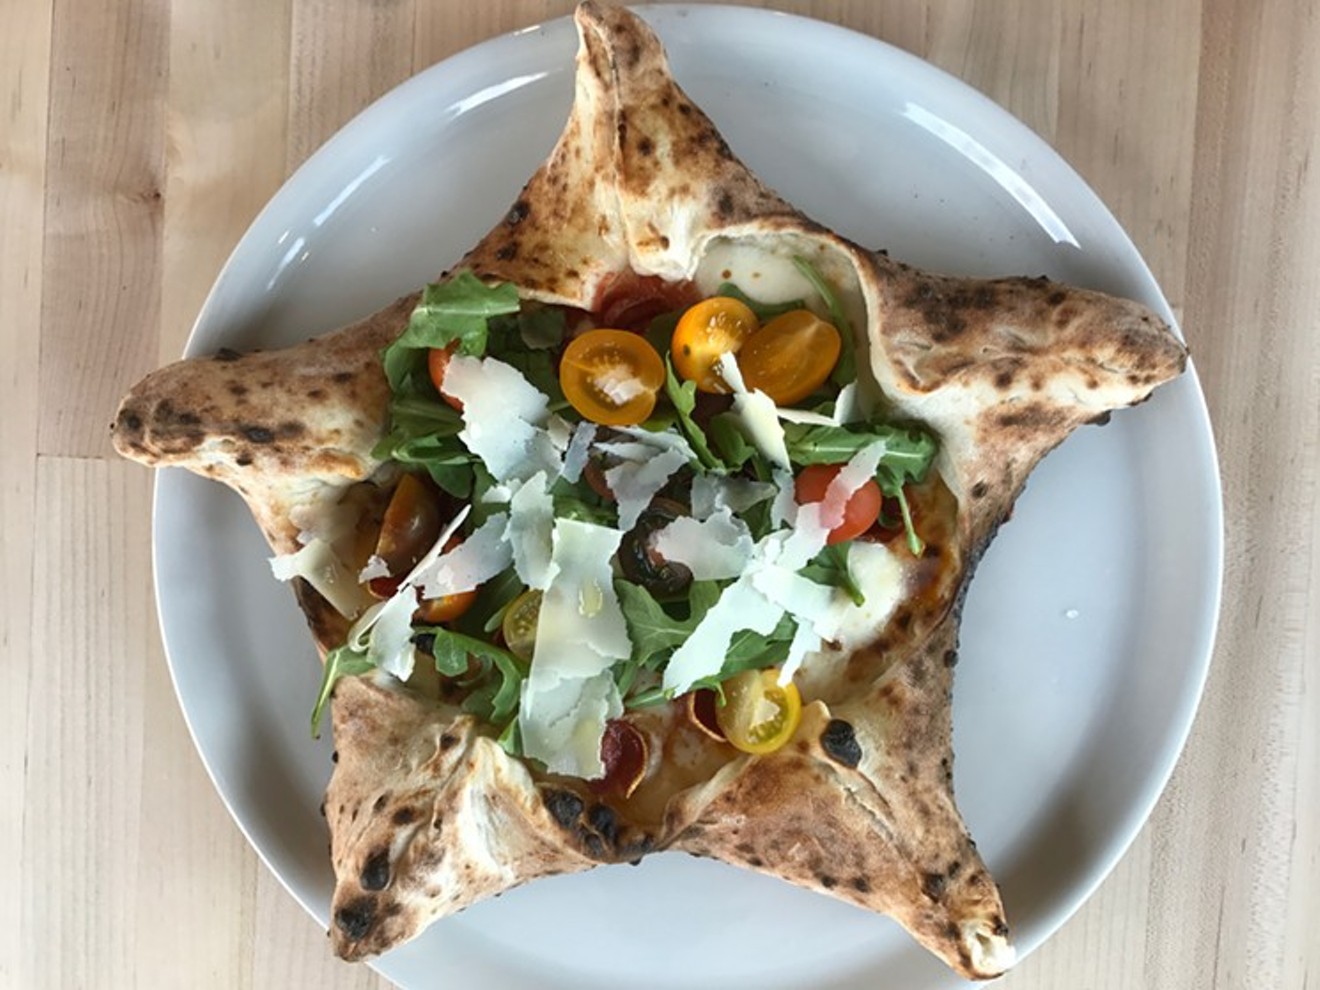 Cane Rosso's eponymous The Star, available at its new location at The Star in Frisco, is both delicious and Instagram ready.